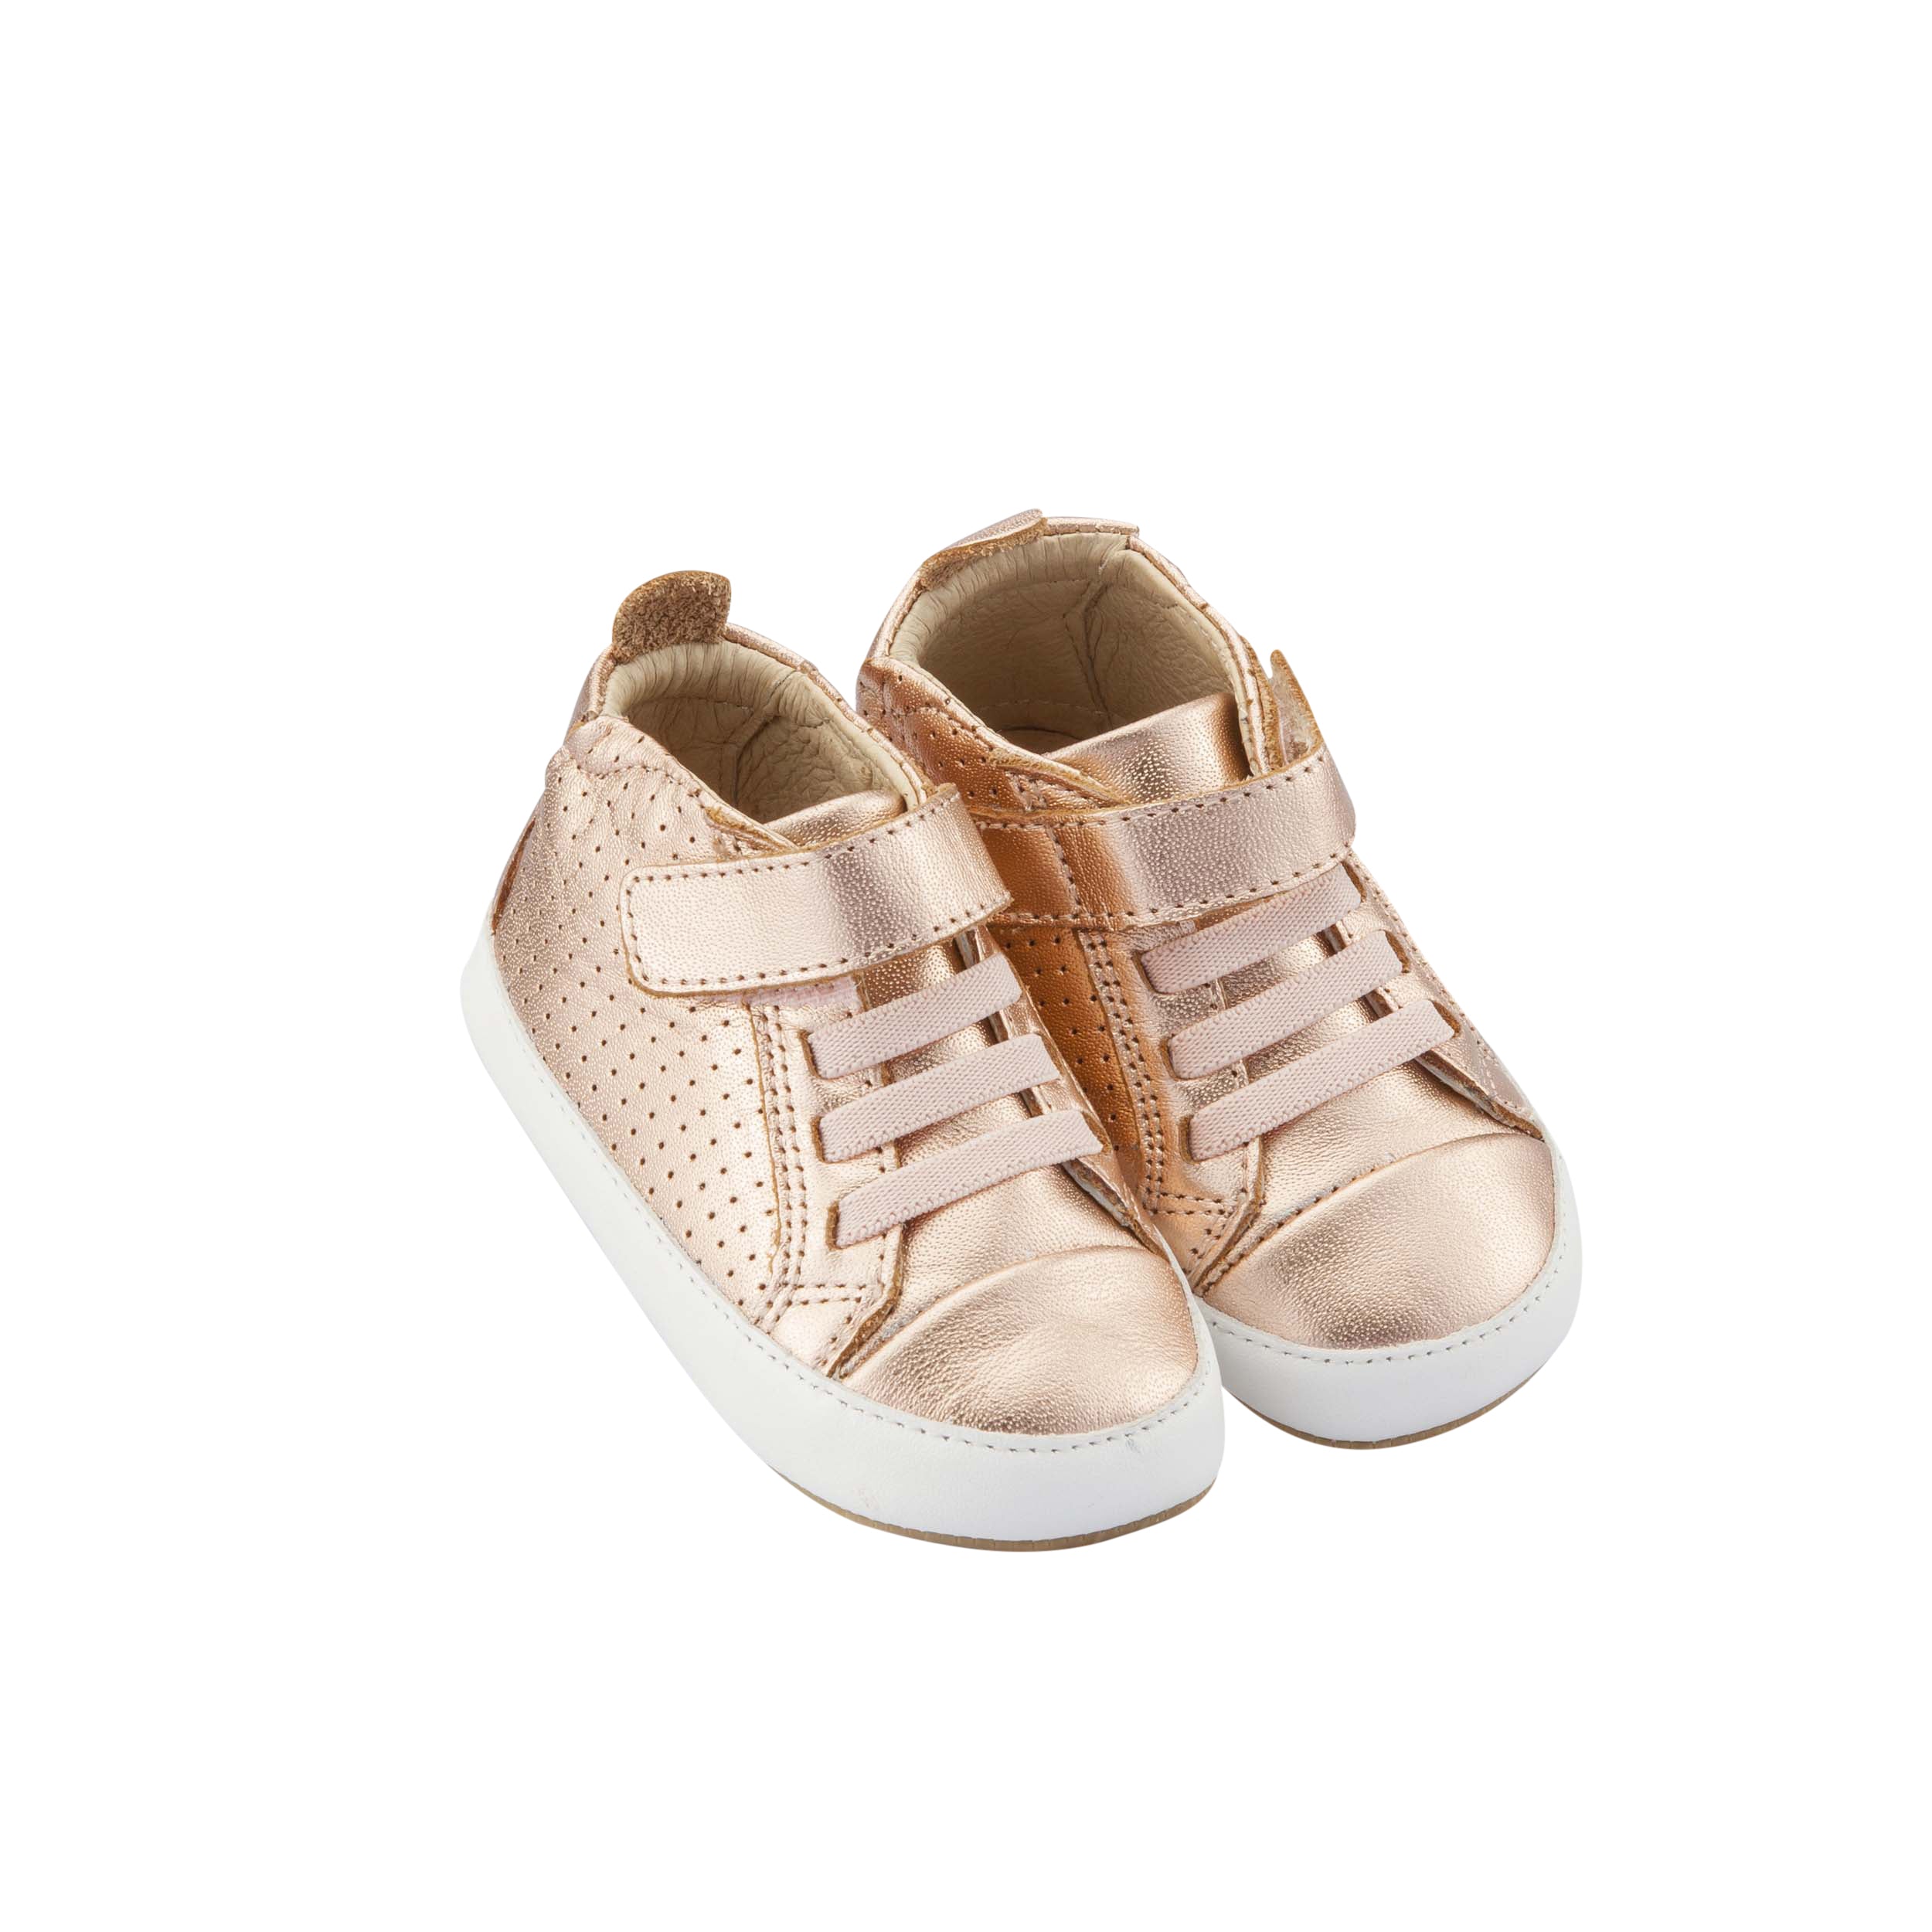 Cheer Bambini Copper/Snow. Shop online or in store at Sticky Fingers Children's Boutique, Niddrie, Melbourne.